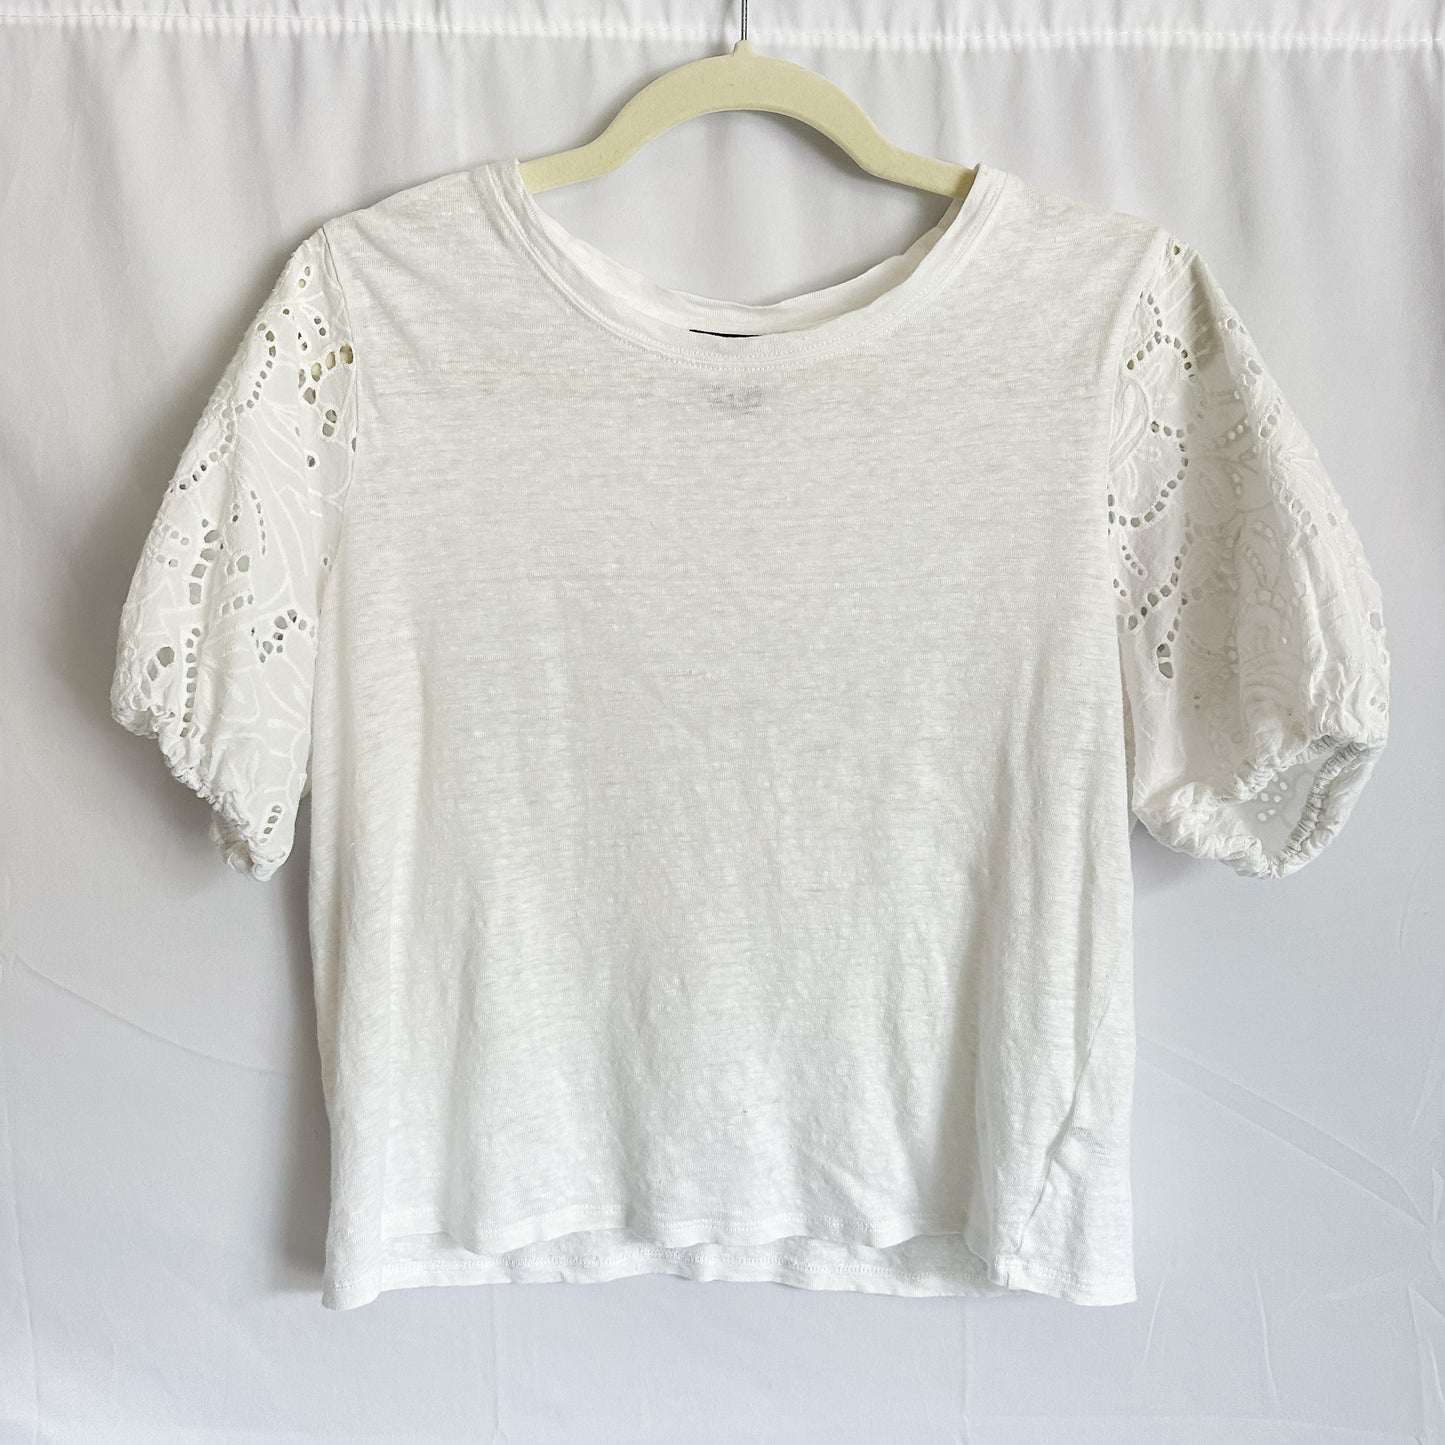 White Puffed Sleeve Linen Top (fits XS-S)